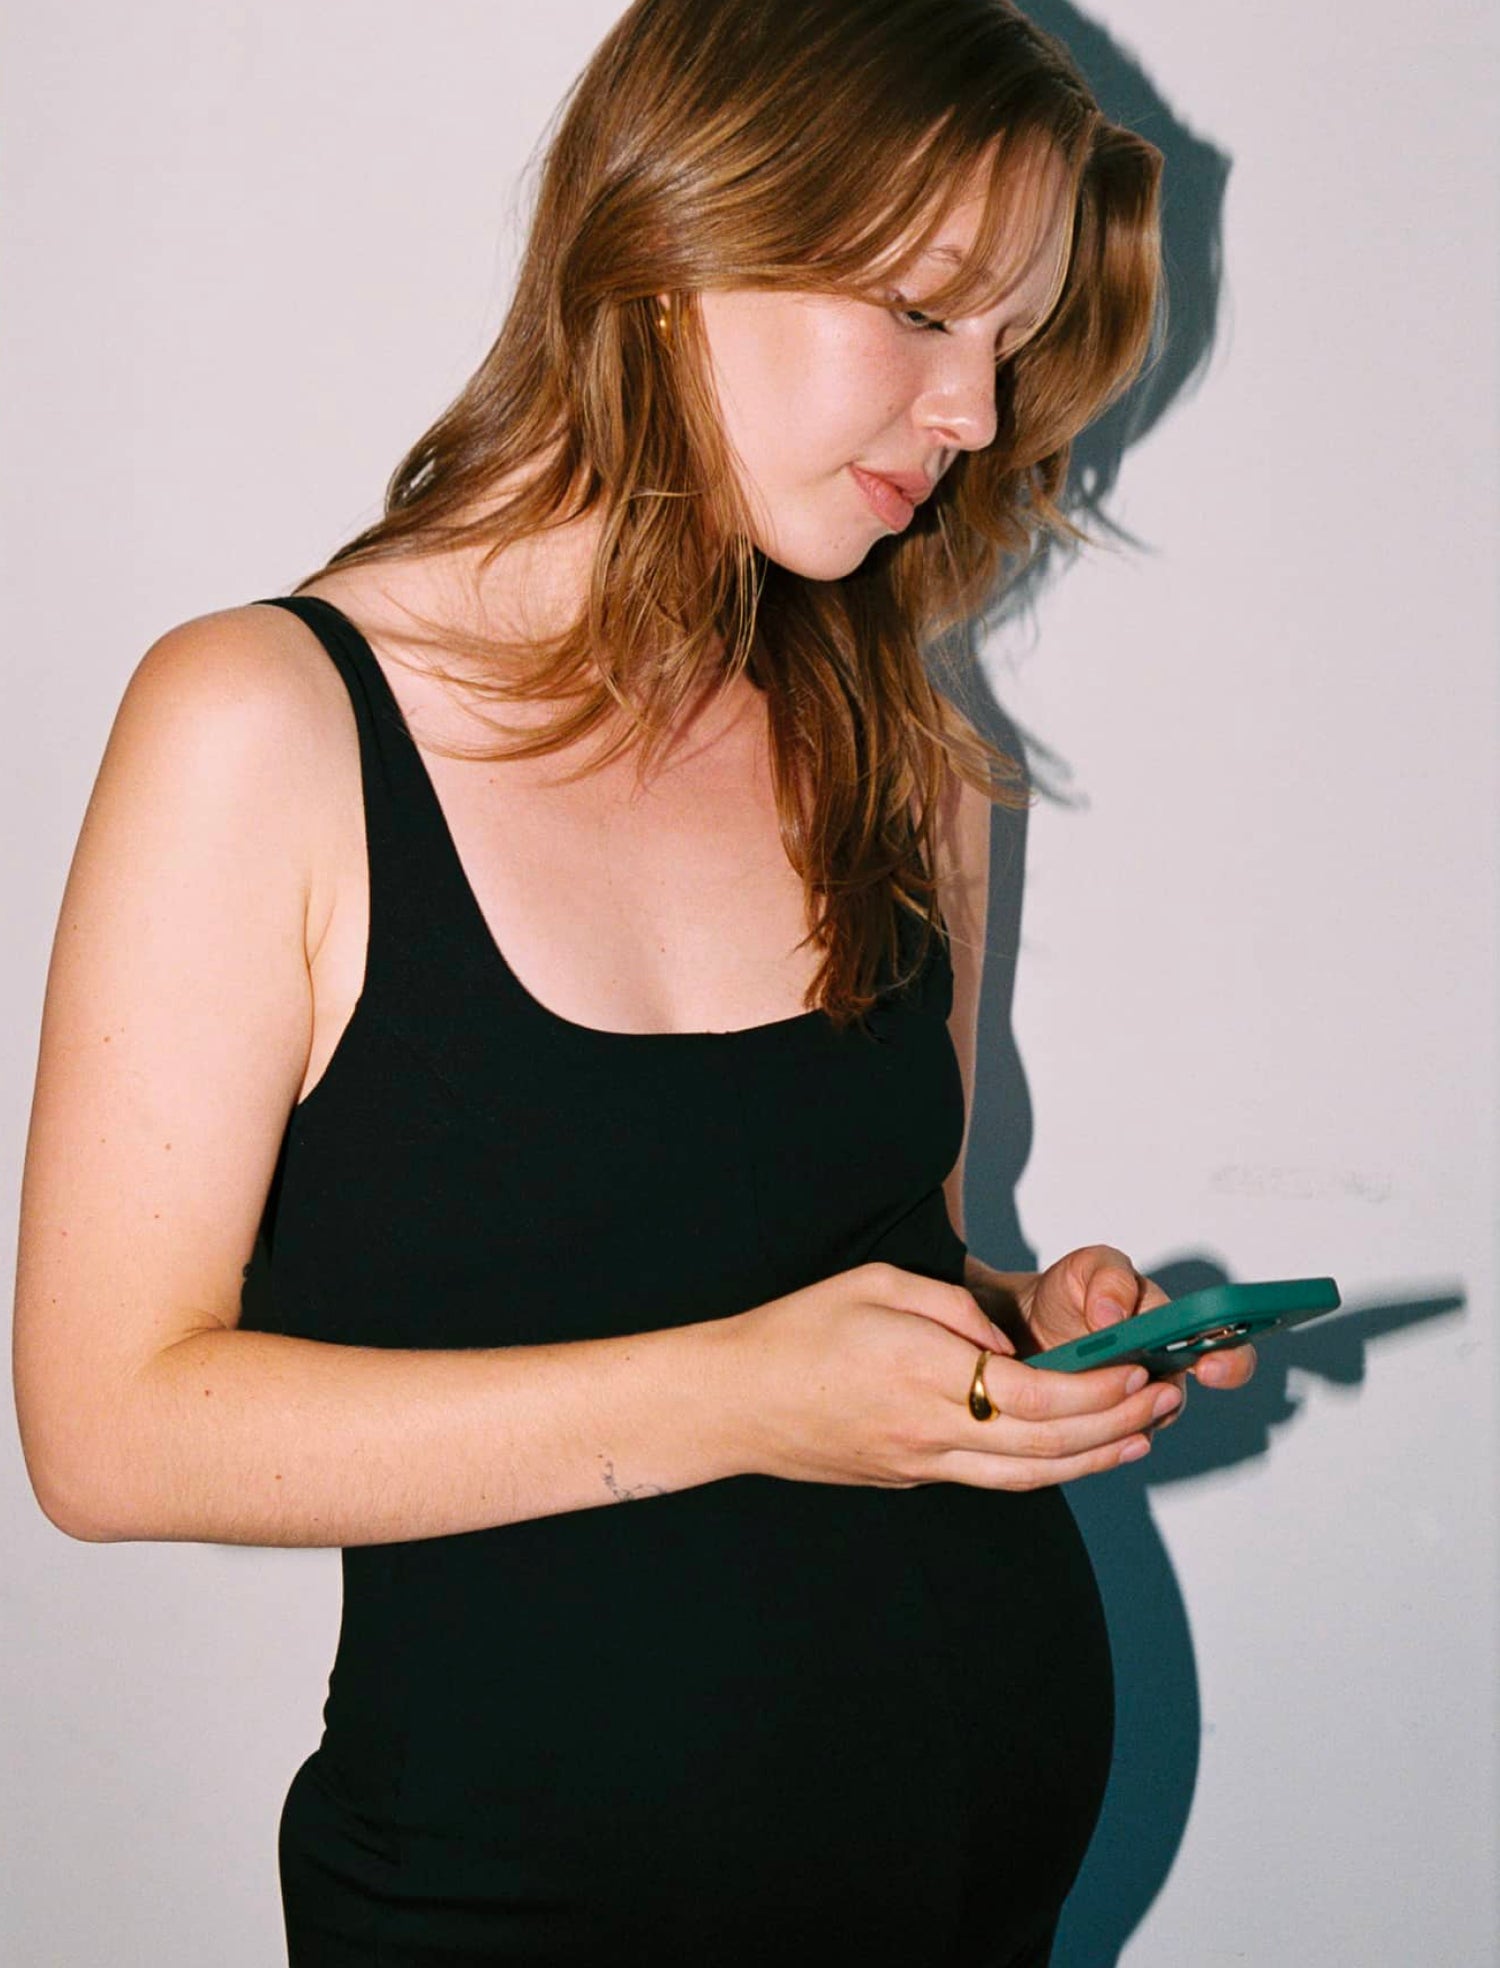 Pregnant women using her phone while wearing EMF shielding maternity wear